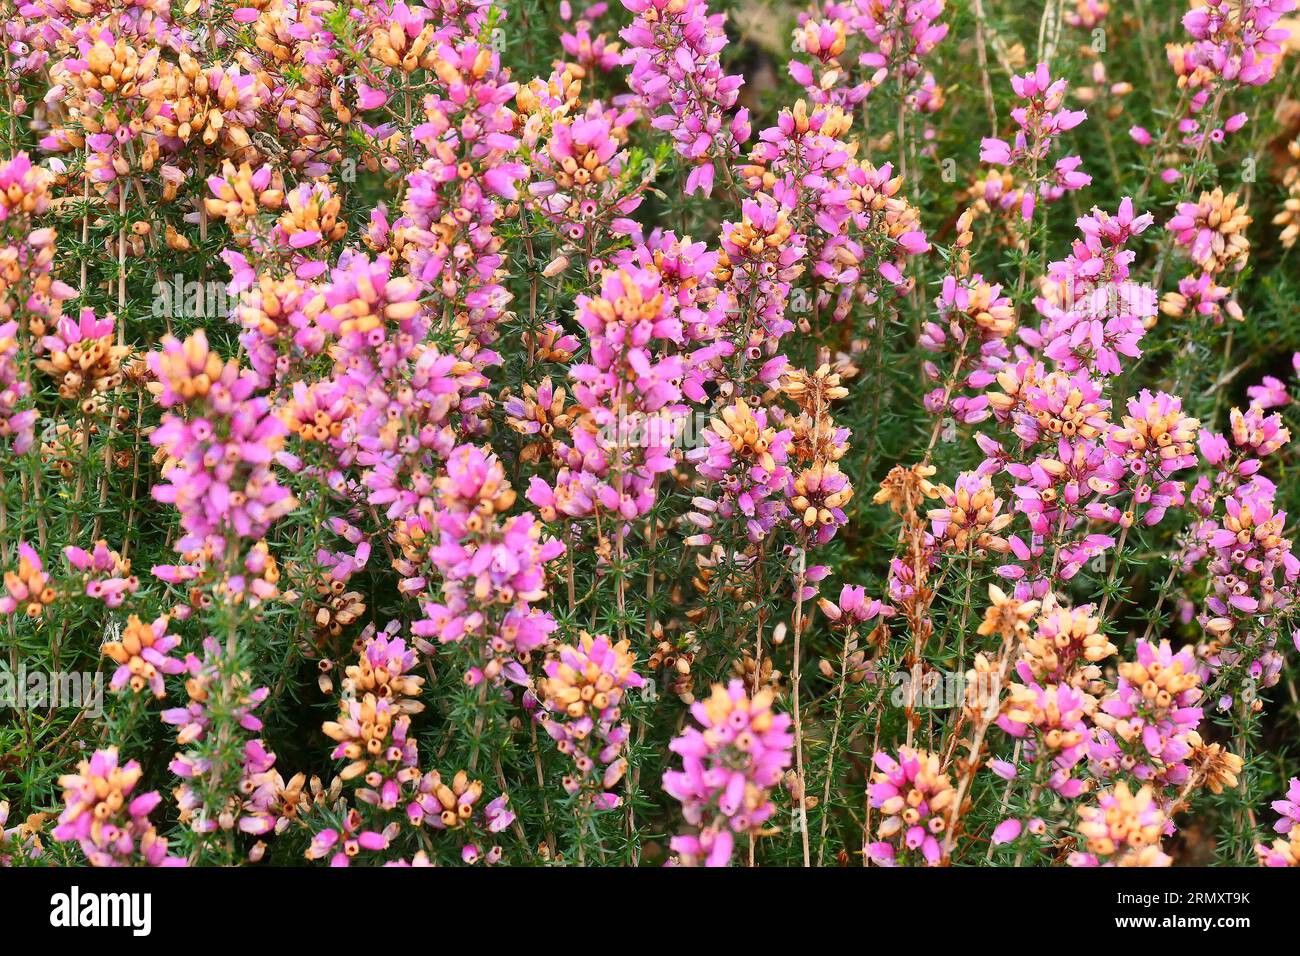 Closeup of the rose-pink flowers of the summer flowering low growing evergreen perennial bell heather erica cinerea frances. Stock Photo